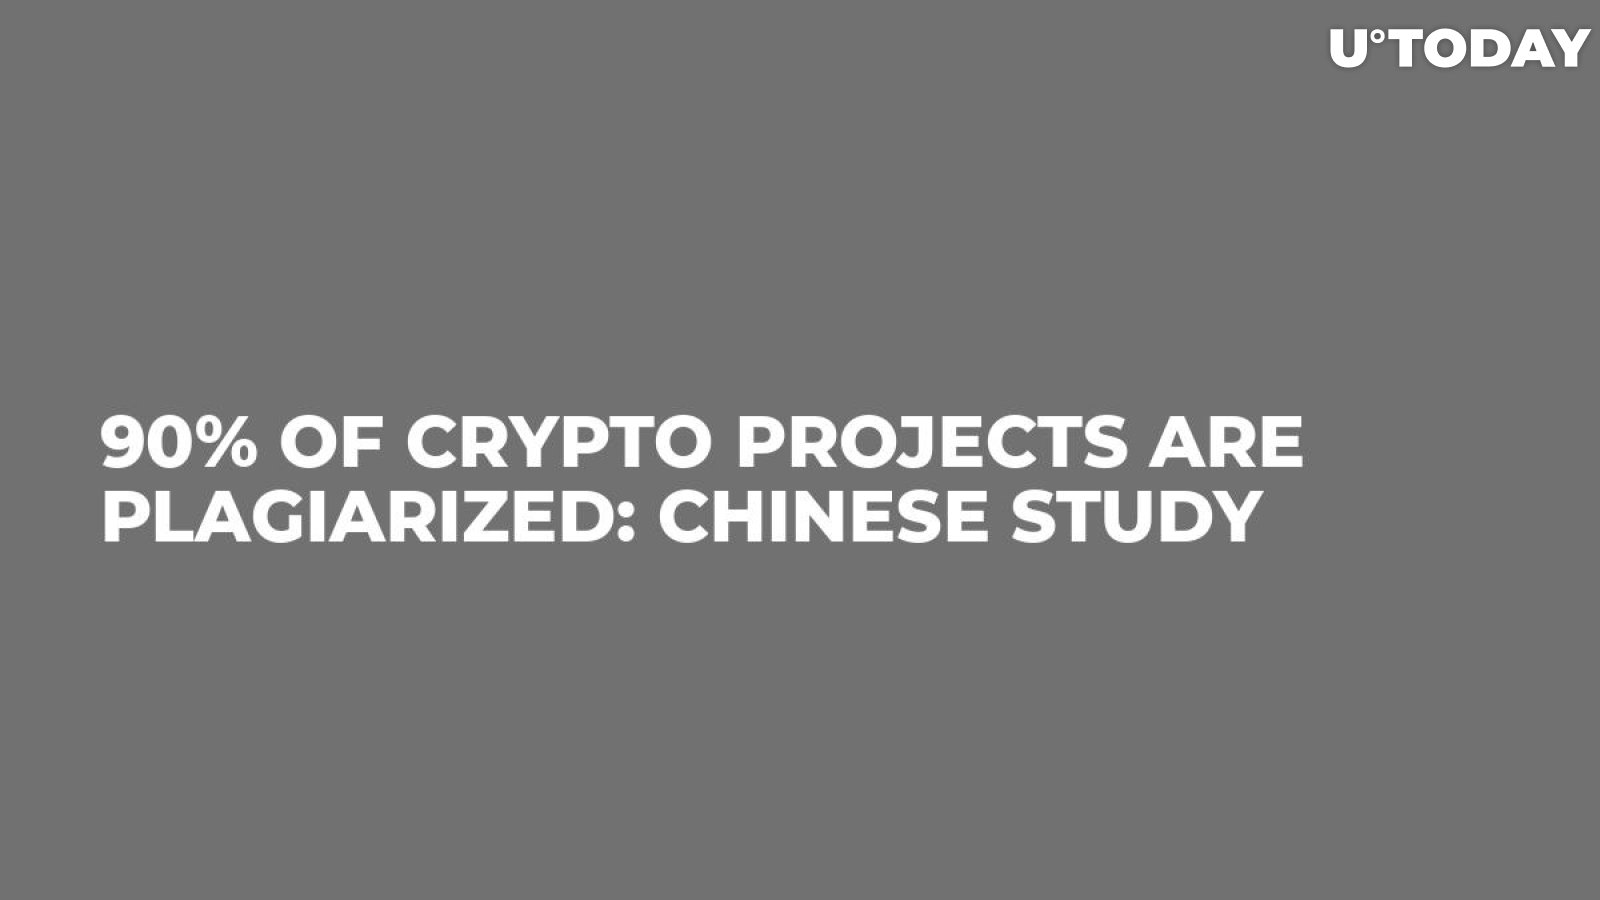 90% of Crypto Projects Are Plagiarized: Chinese Study